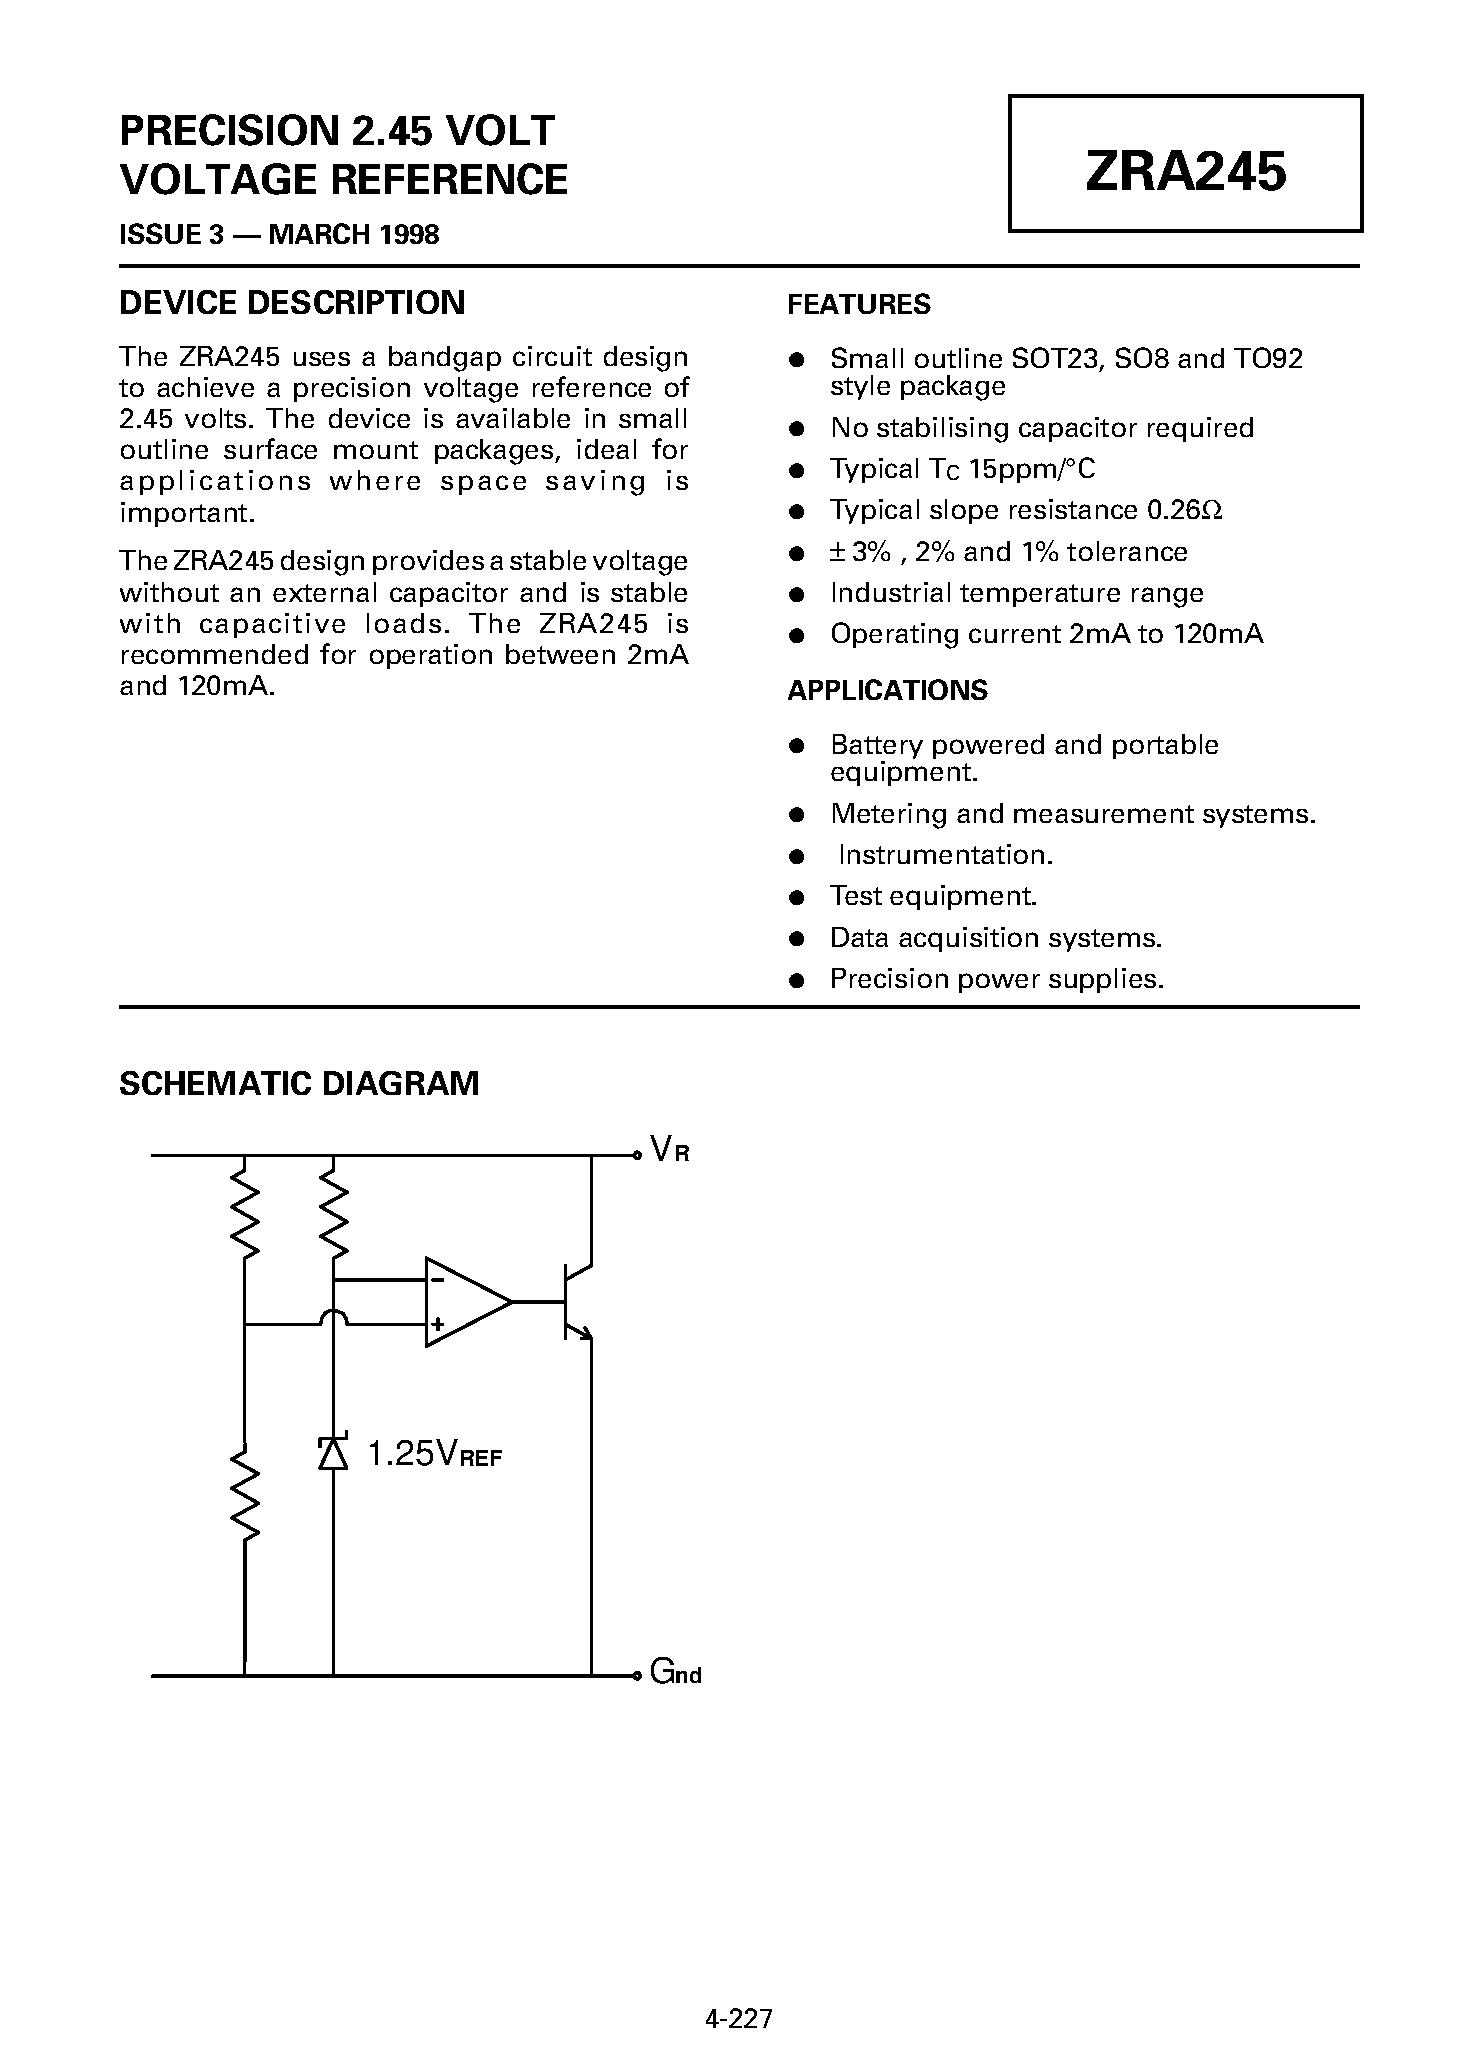 Datasheet ZRA245N801 - PRECISION 2.45 VOLT VOLTAGE REFERENCE page 1